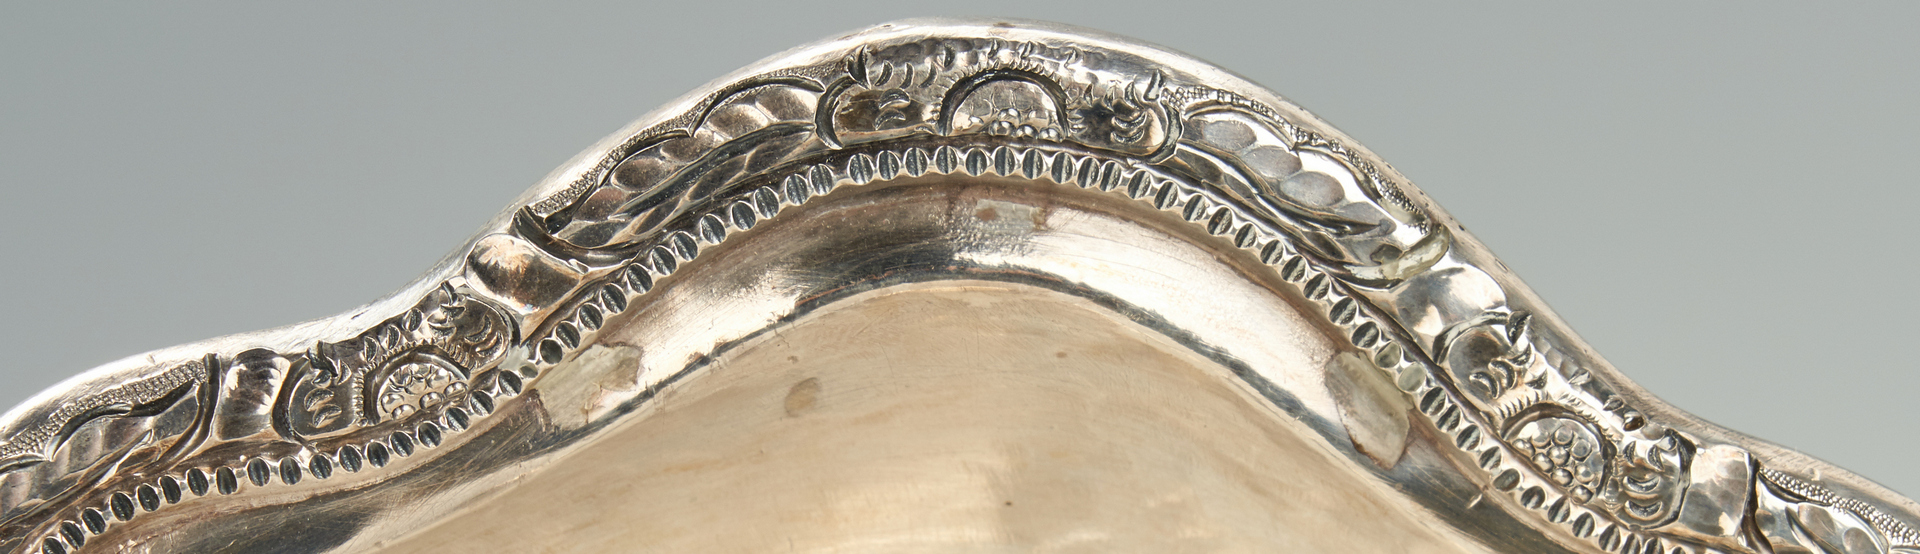 Lot 959: Large Silver bowl marked Plata 900